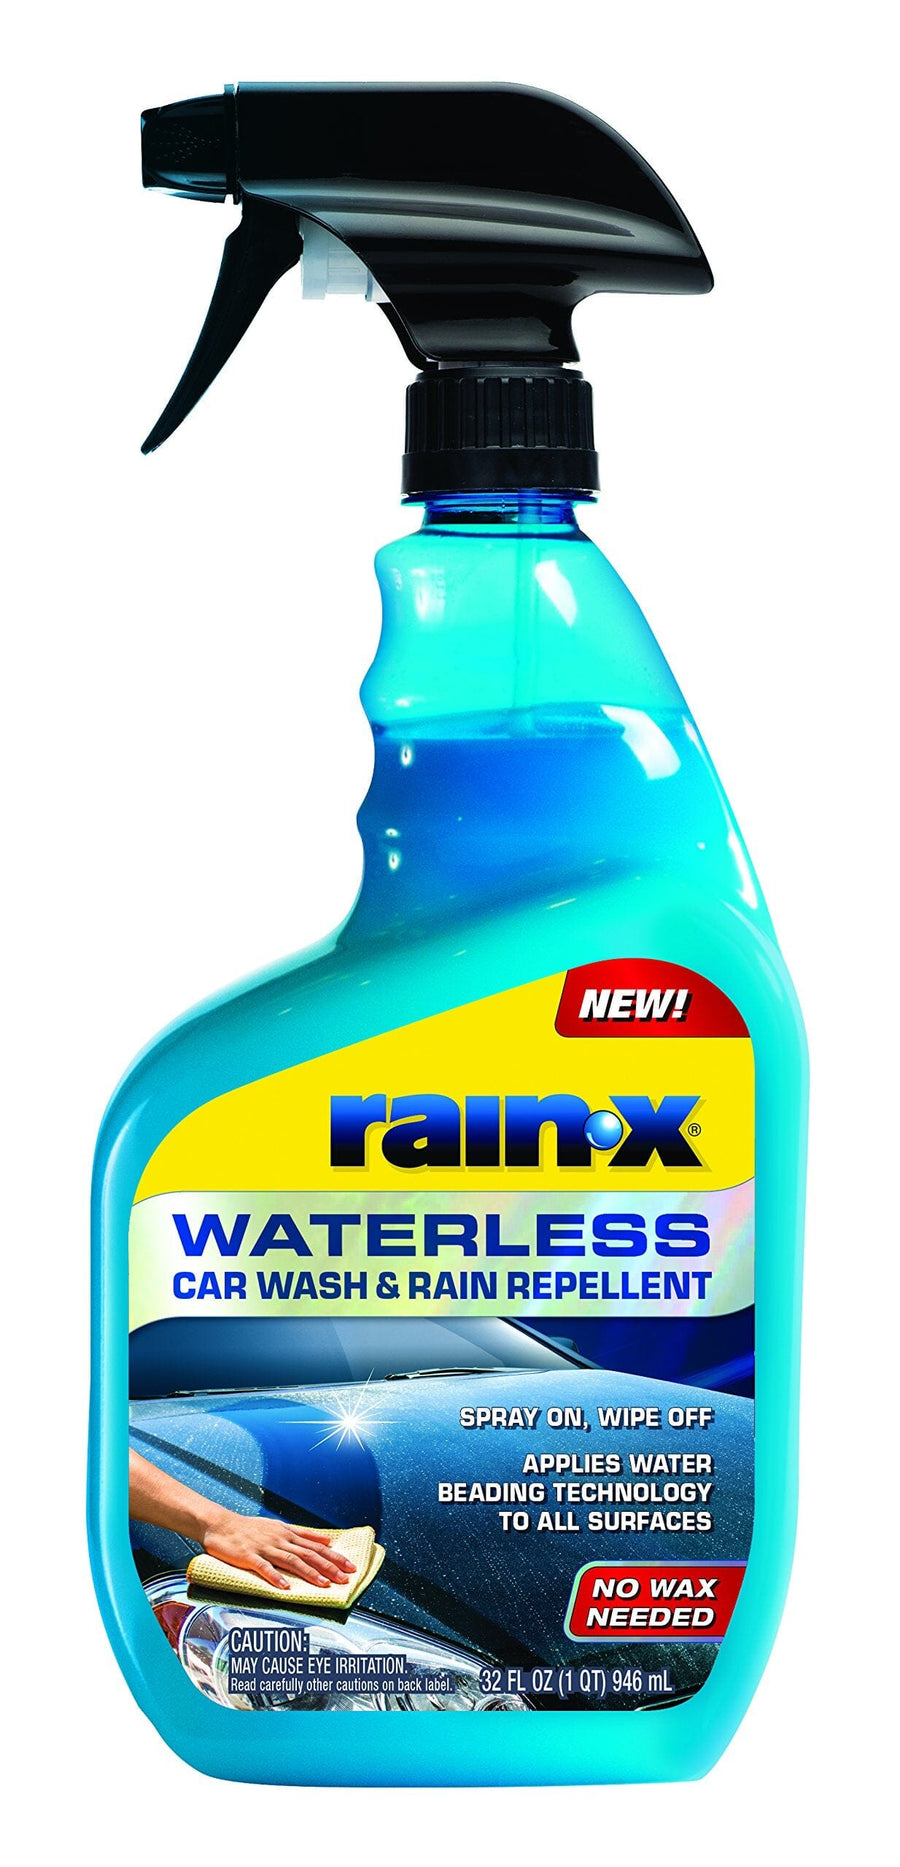 Rain X Plastic Water Repellent Review and Test Results on my